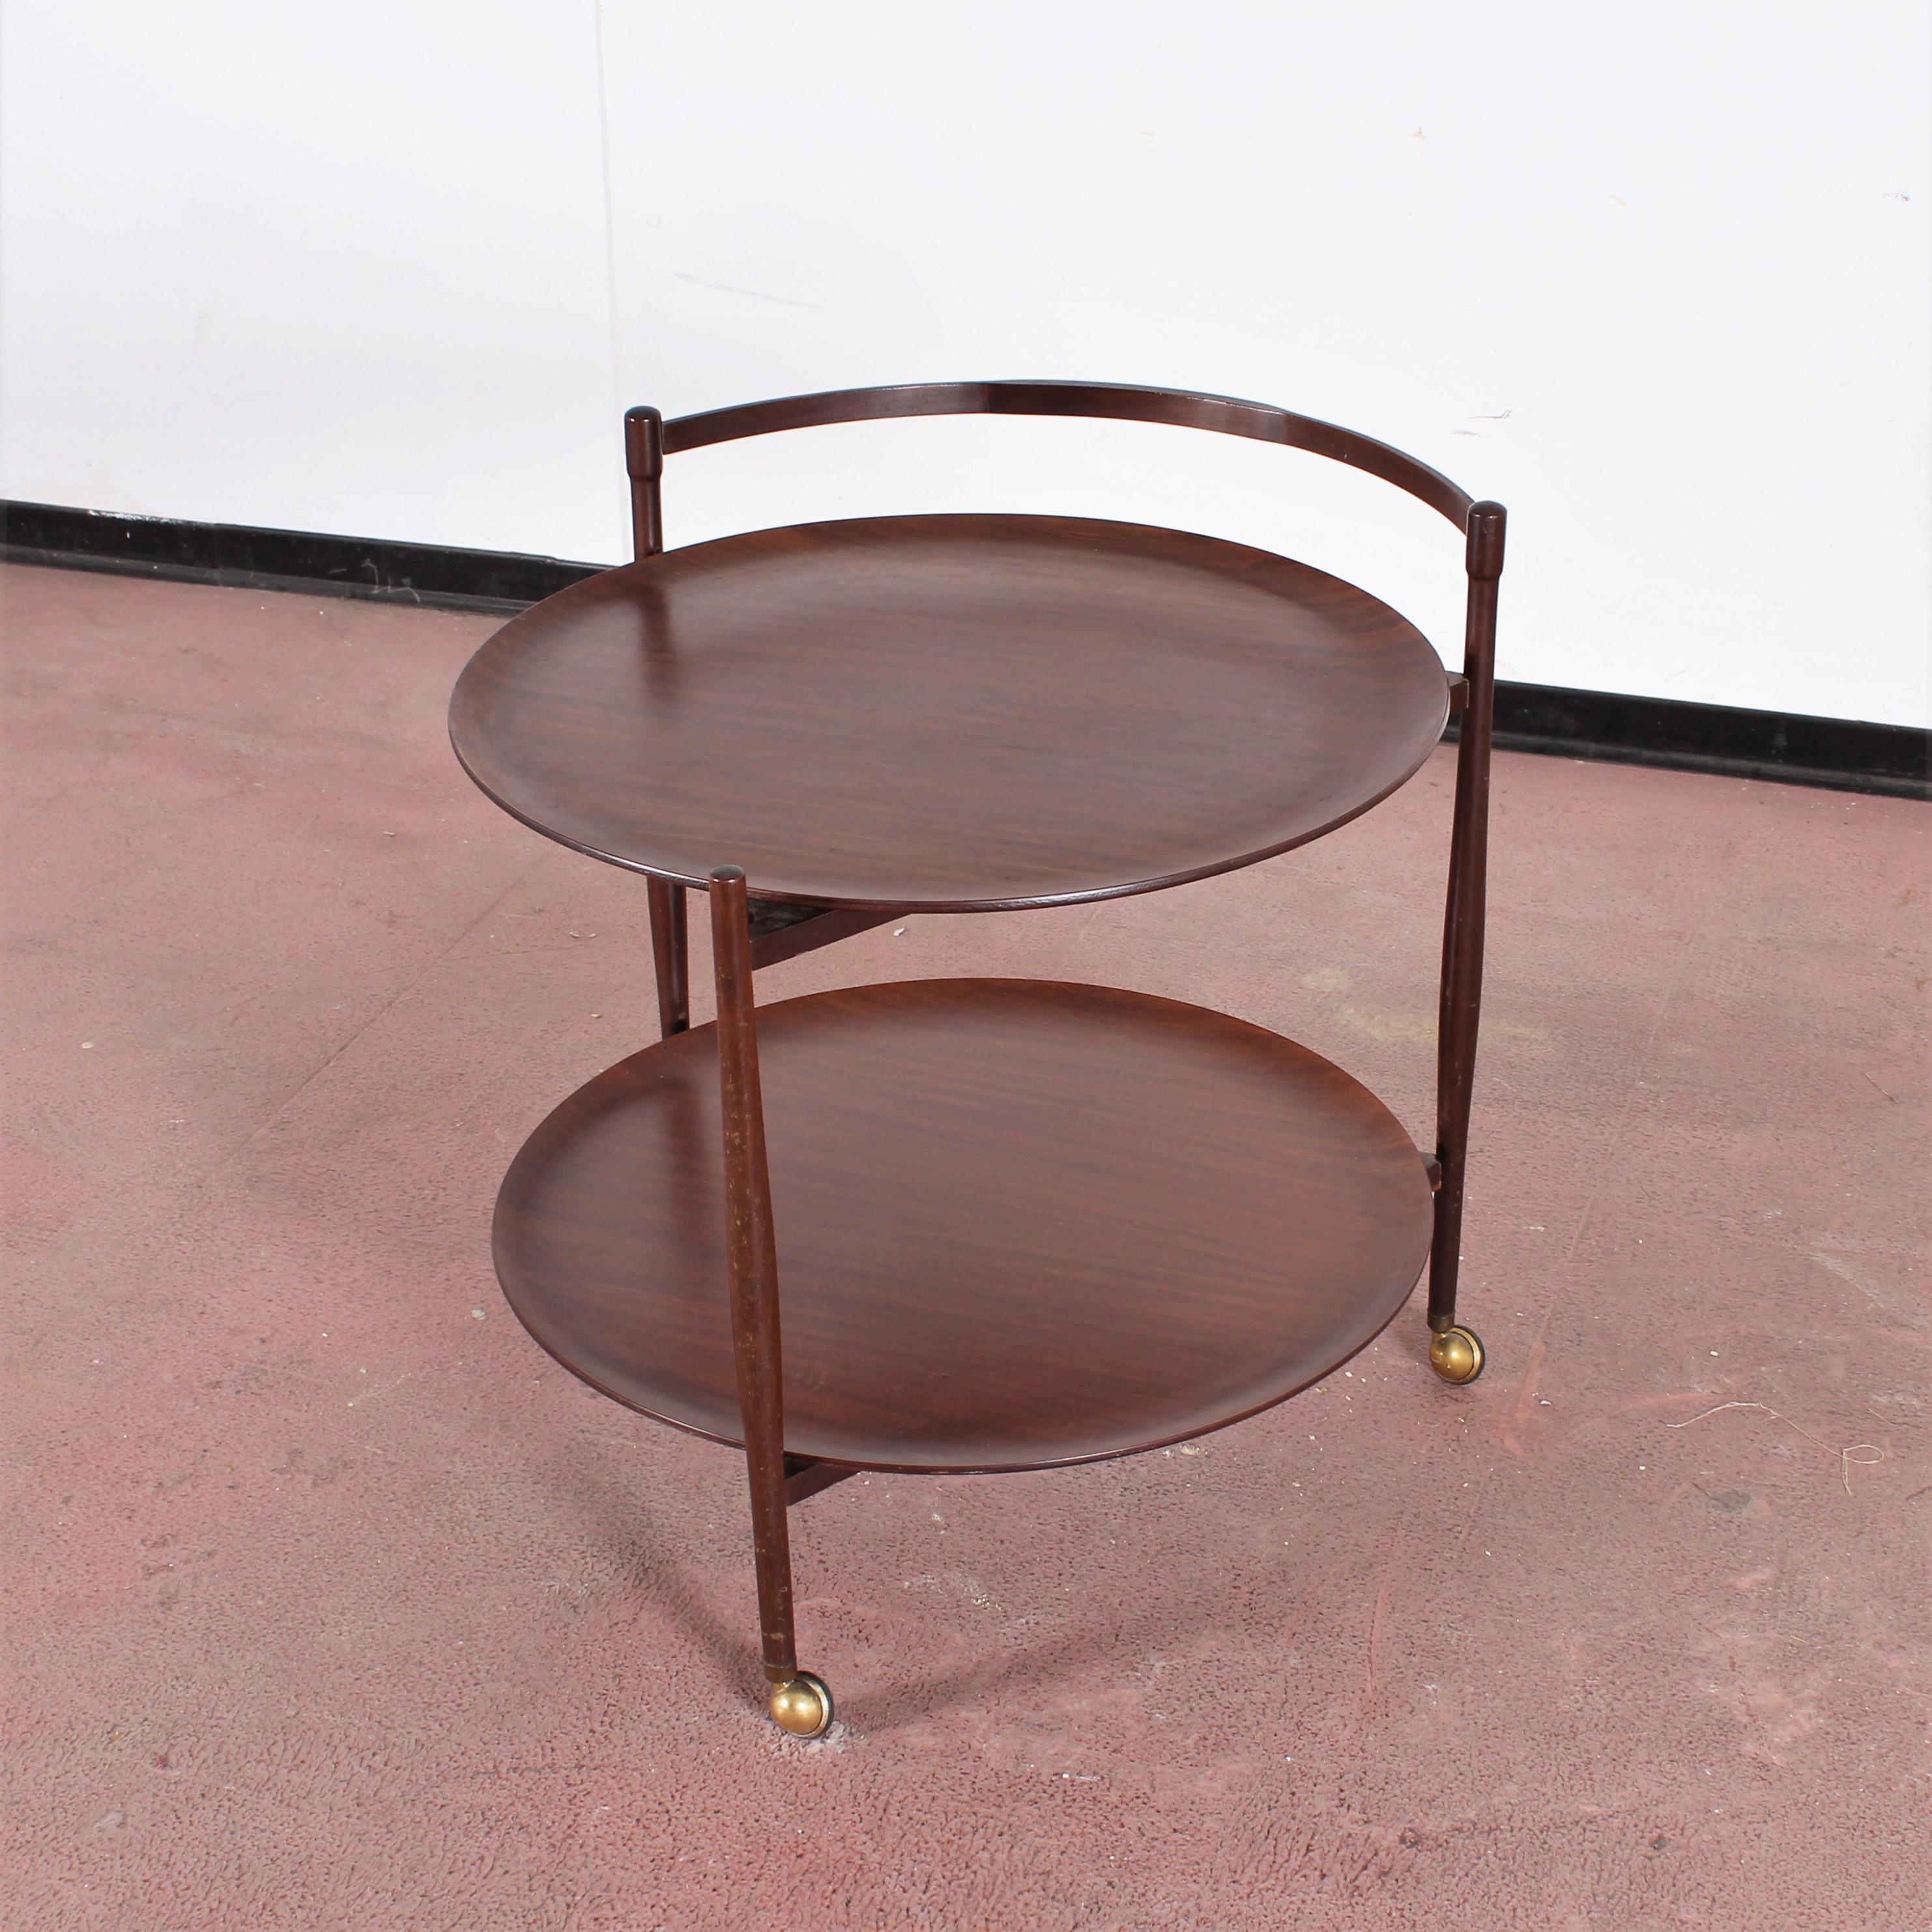 Vintage teak bar trolley with three brass wheels and two large removable circular trays, on two levels.
Signs of use on the back of a tray, highlighted in the photo, Italy, 1960s.
Wear consistent with age and use.